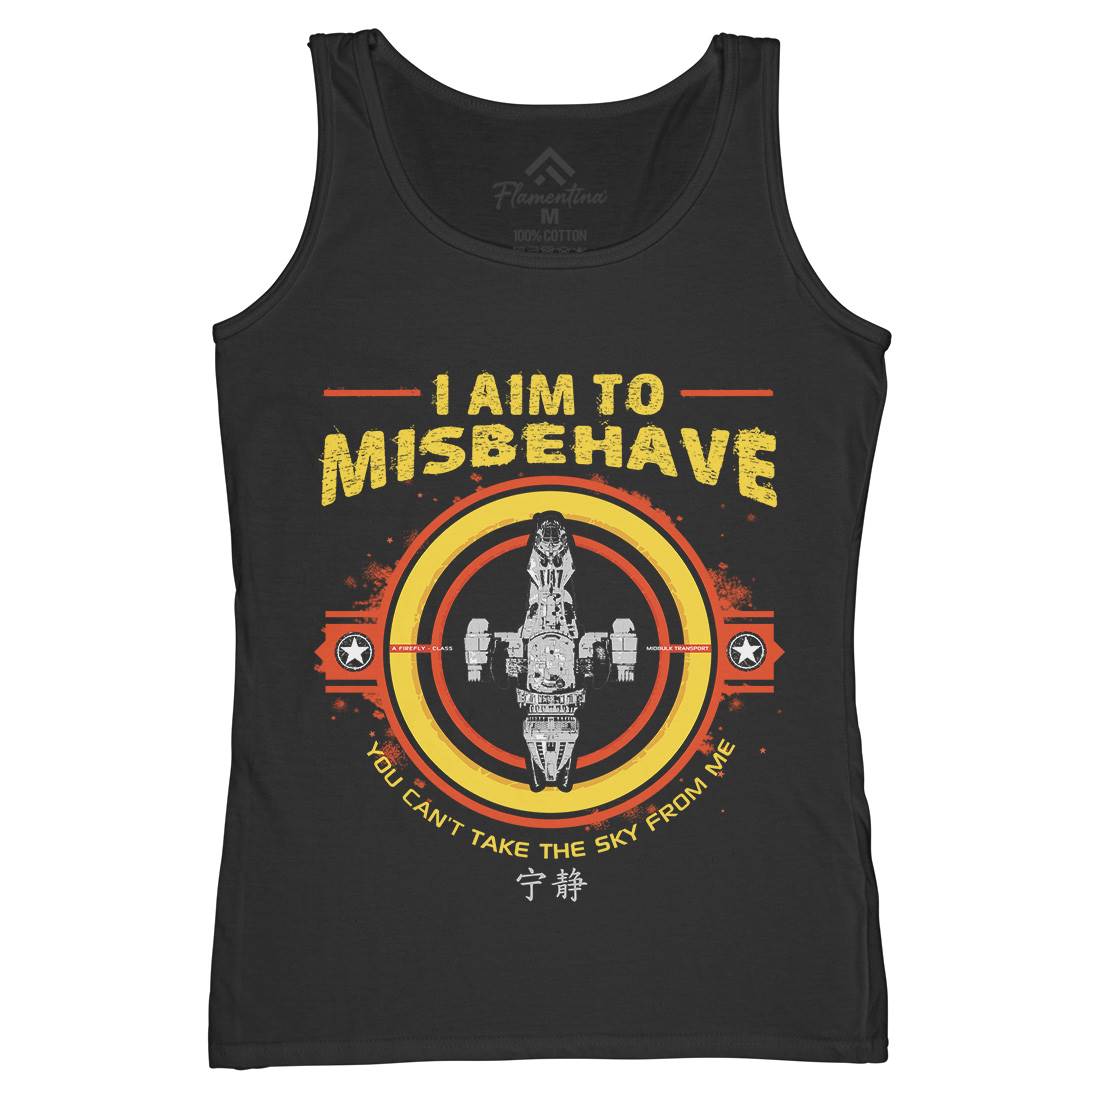 I Aim To Misbehave Womens Organic Tank Top Vest Space D352